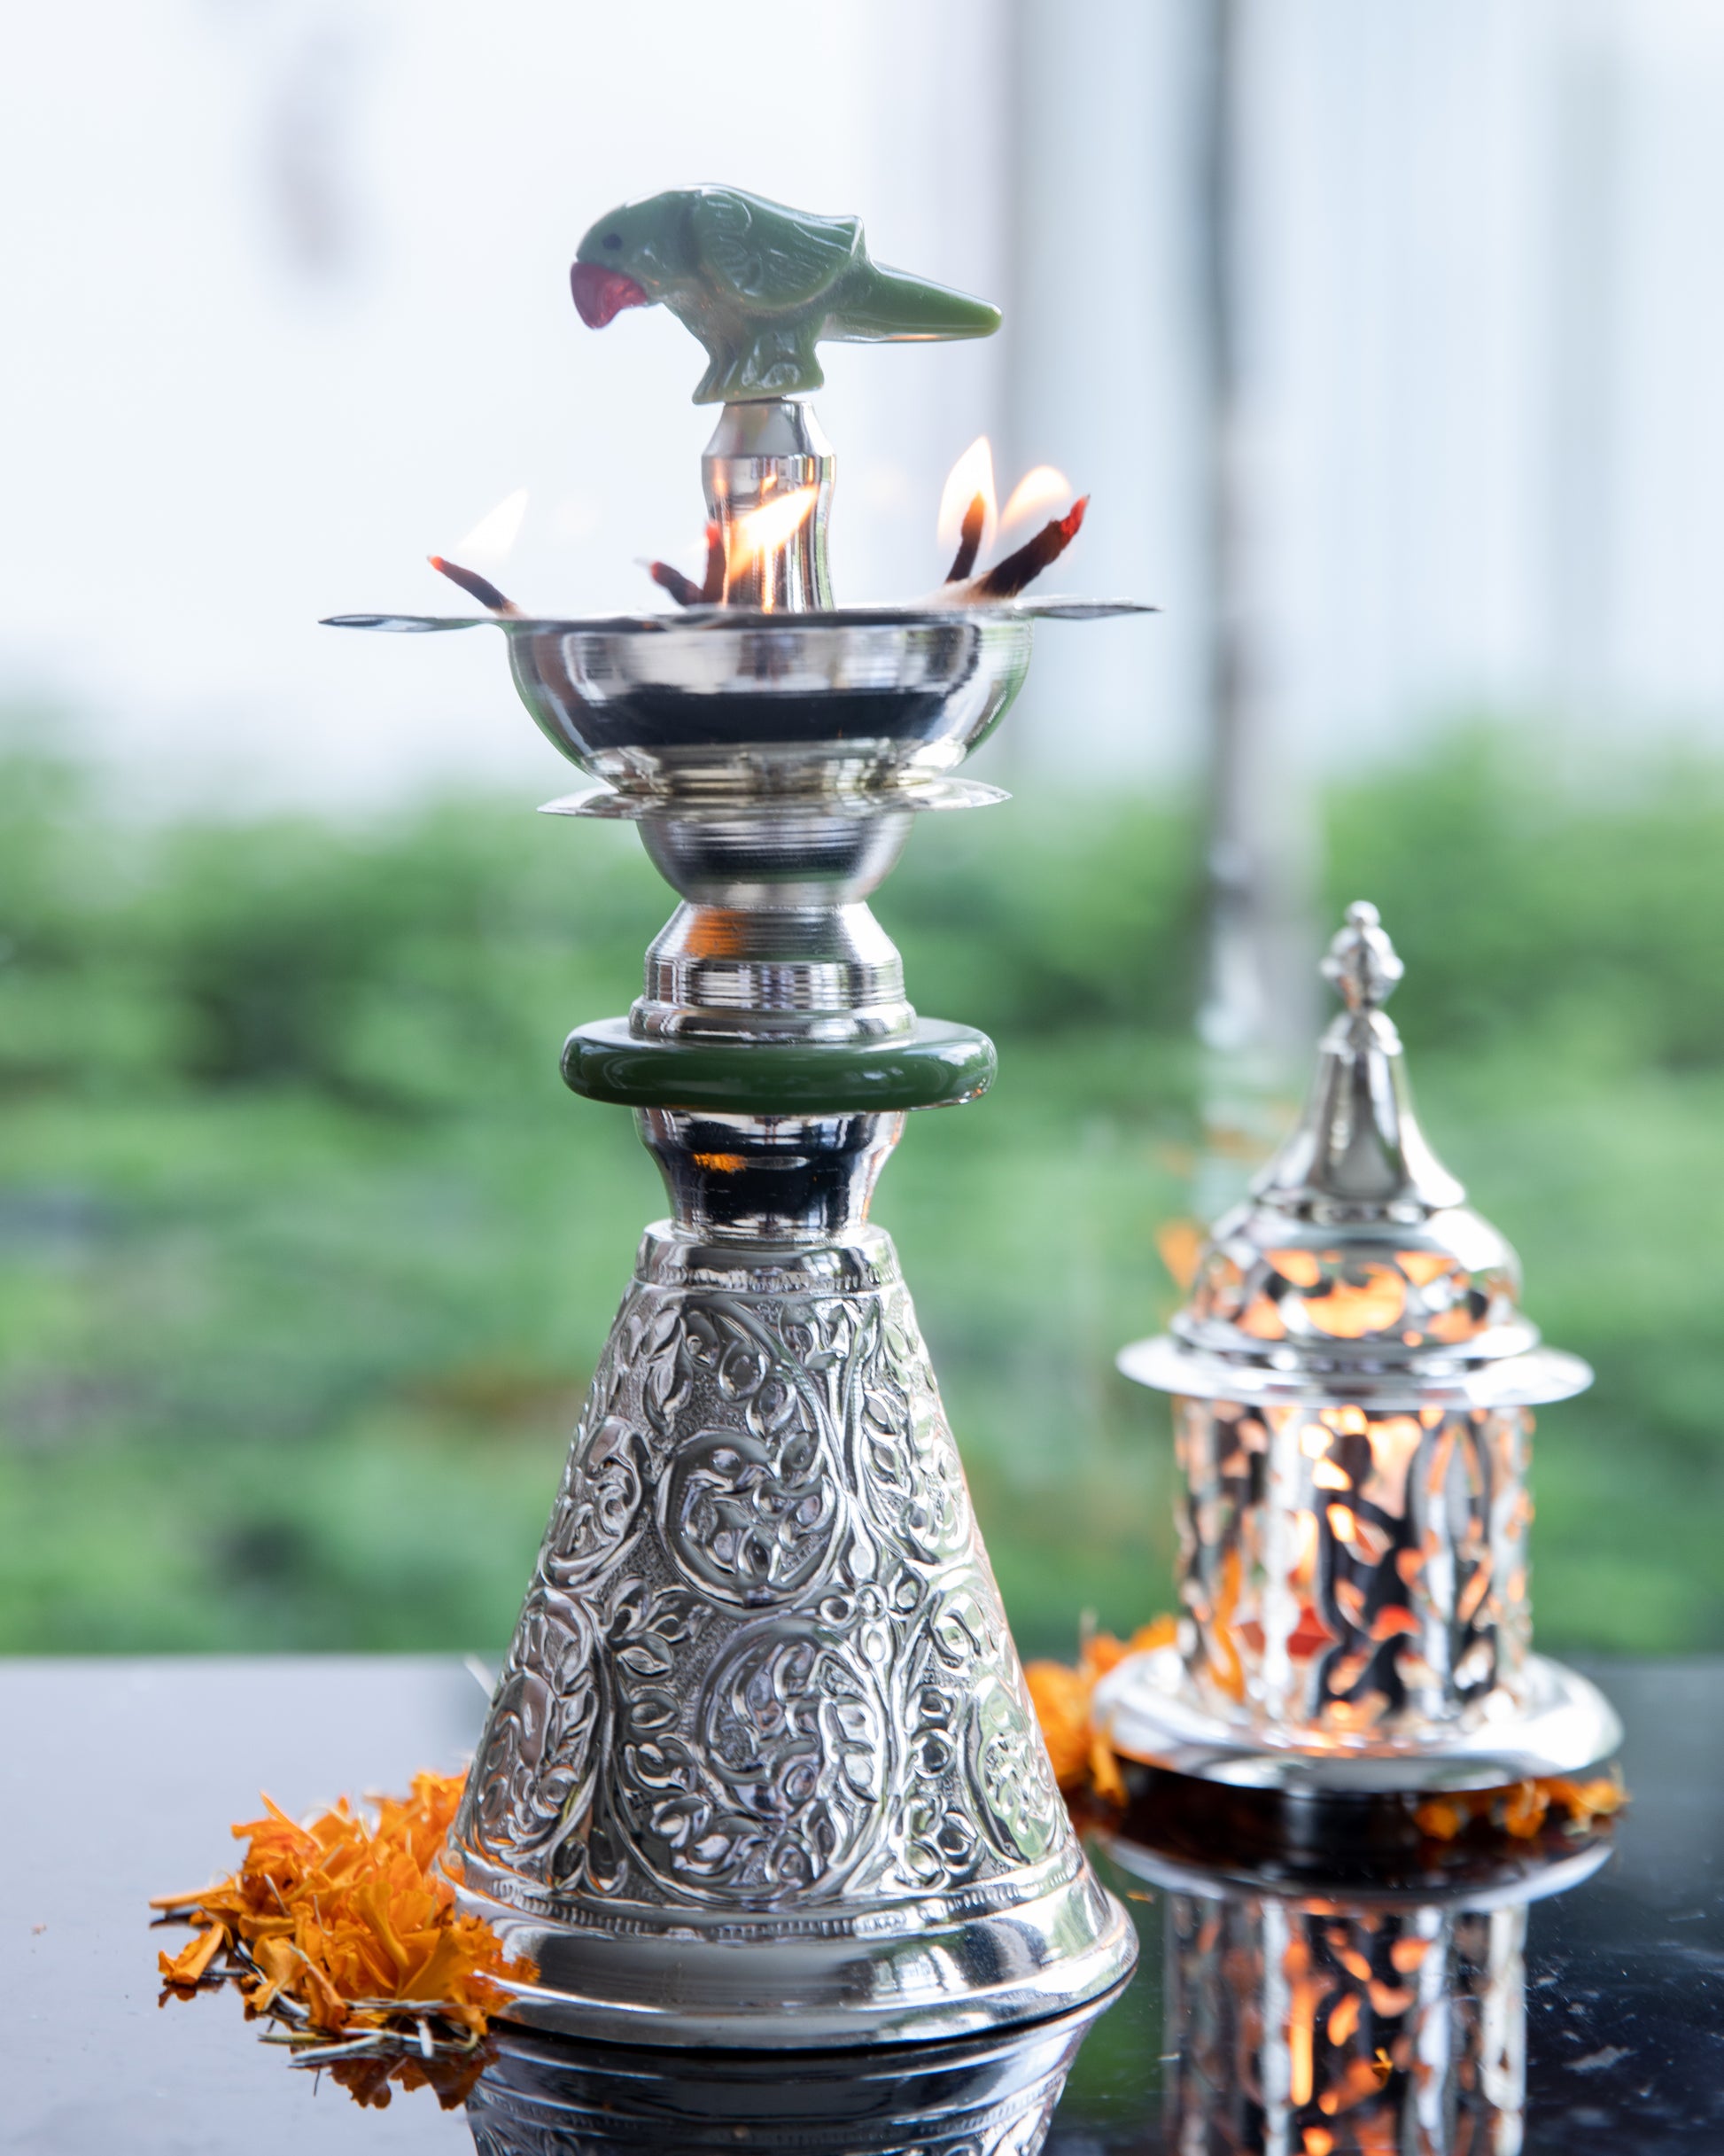 Crafted from high-quality silver, this tall diya radiates a lustrous and timeless glow when lit.